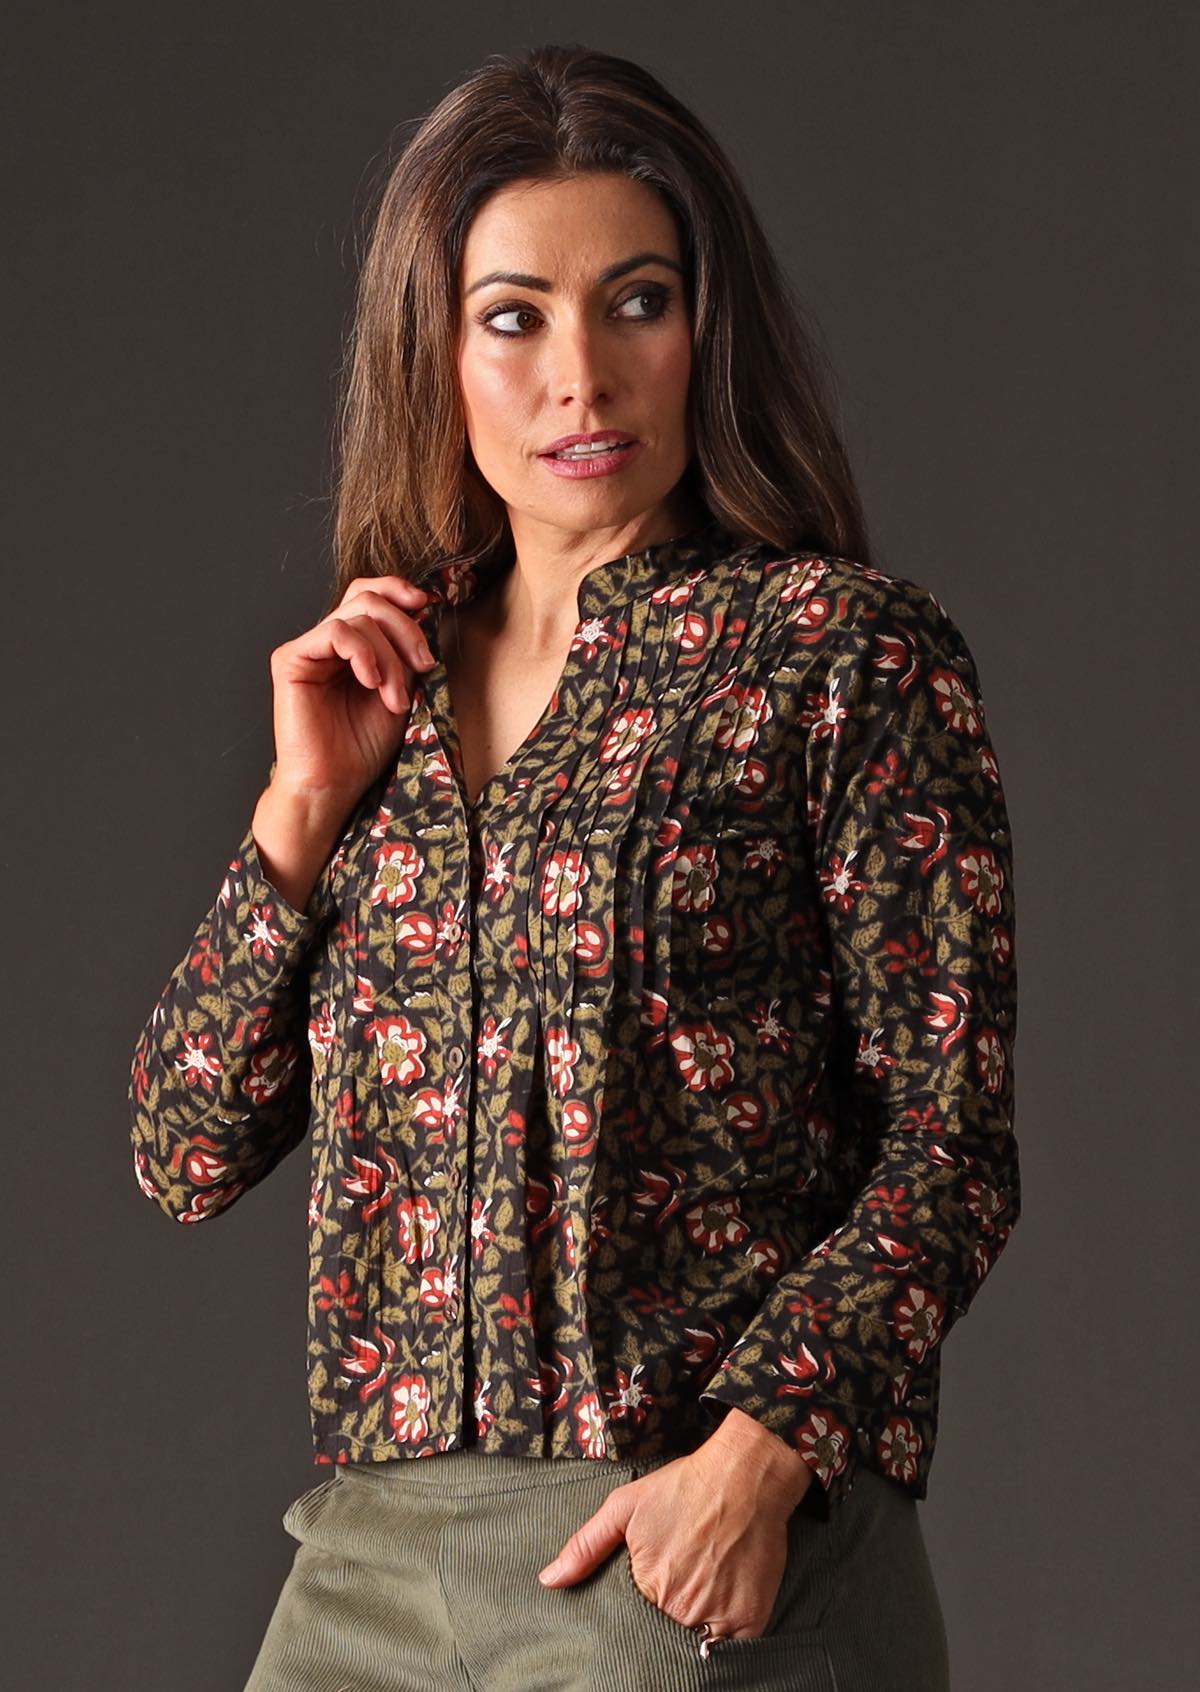 Model in Asha Top Wild Rose black floral print cotton blouse side view